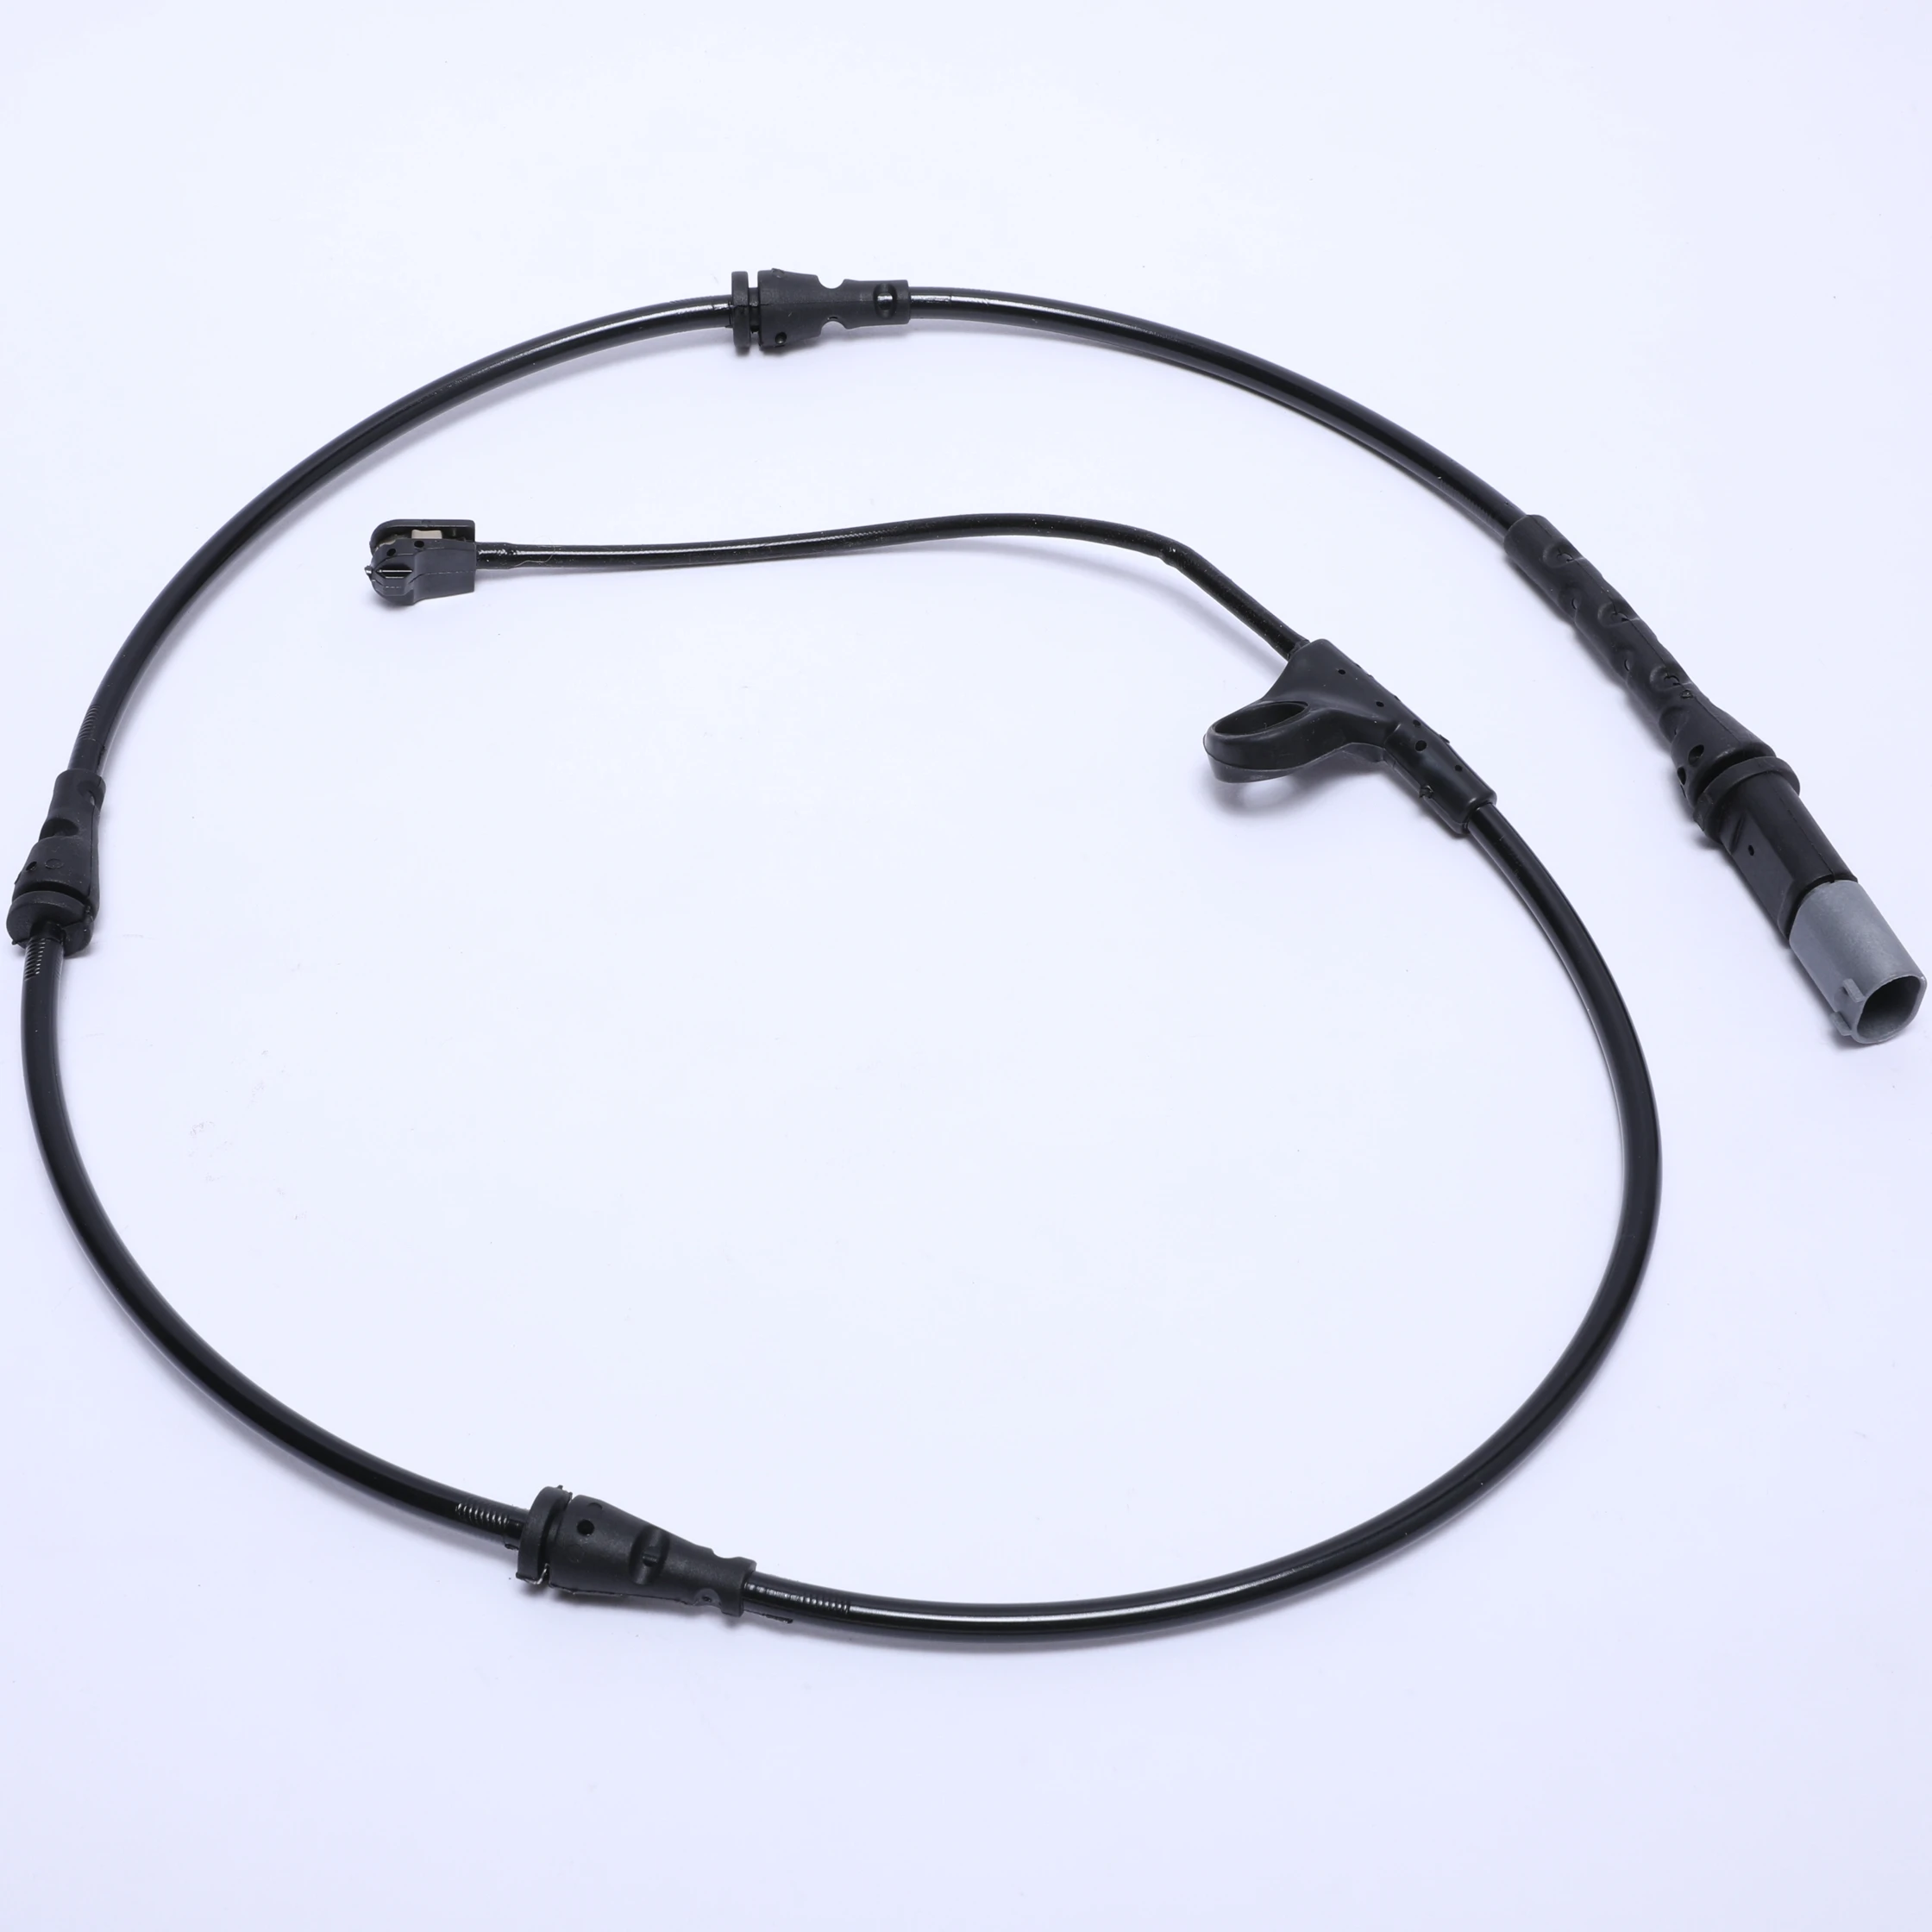 
OE NO. 34356792567 Wholesale Control Automobile Car Parking Brake Cable Assembly Line for BMW X5 Series,X6 Series 2008   (62366784647)